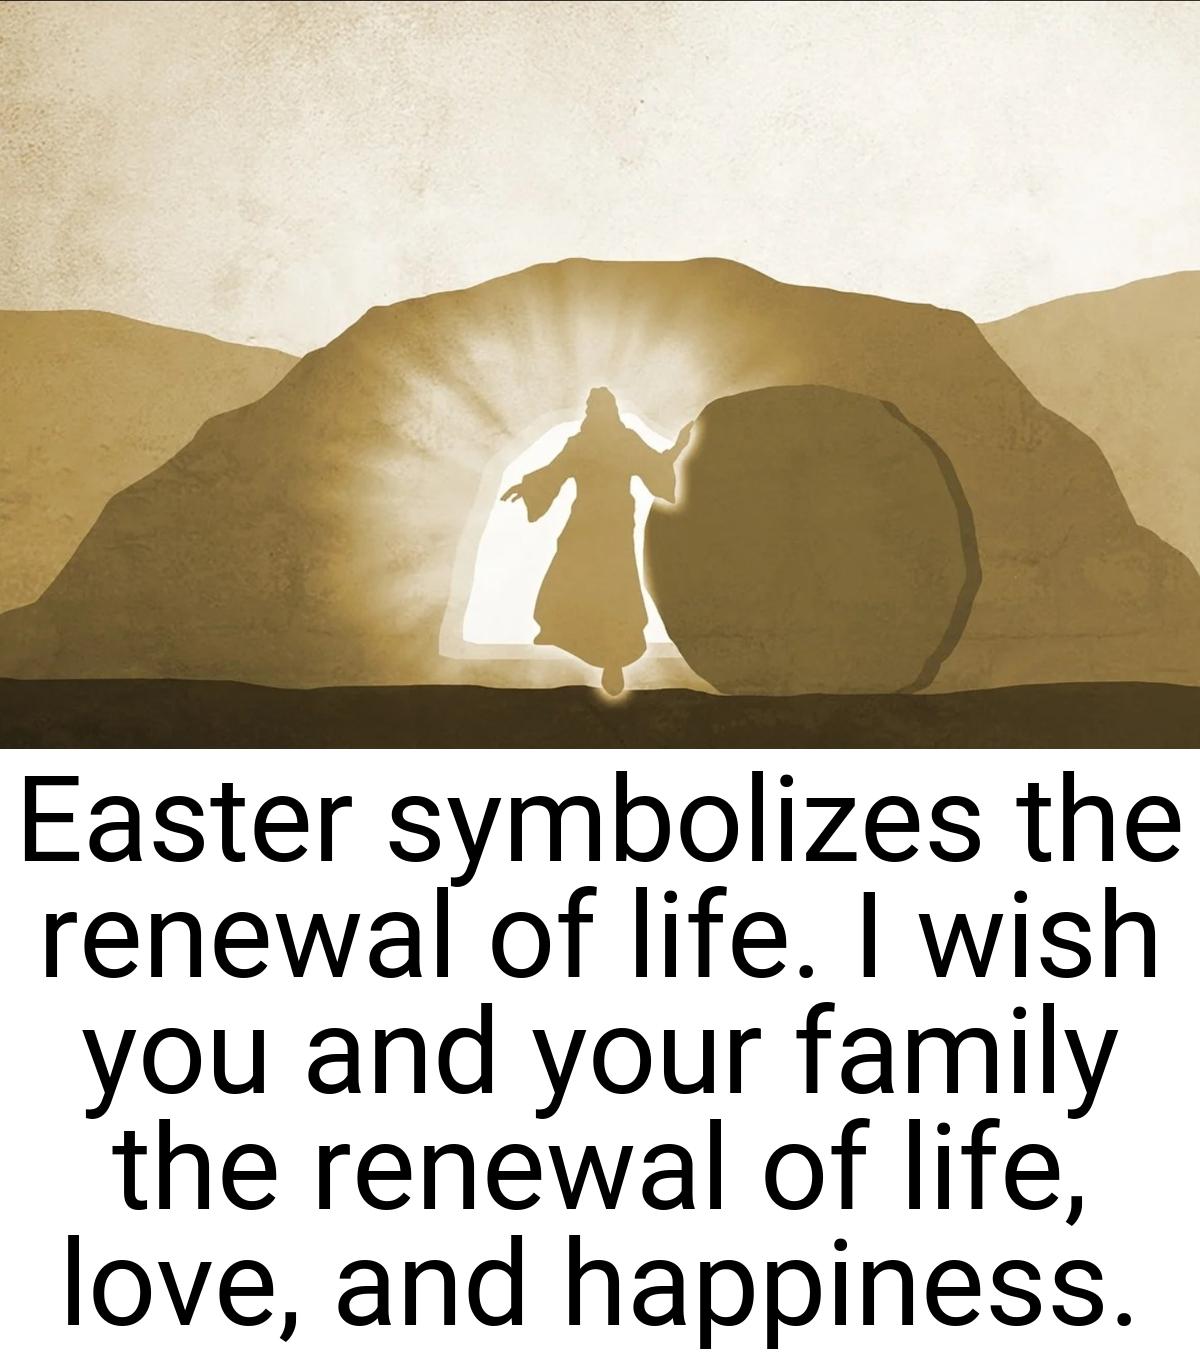 Easter symbolizes the renewal of life. I wish you and your